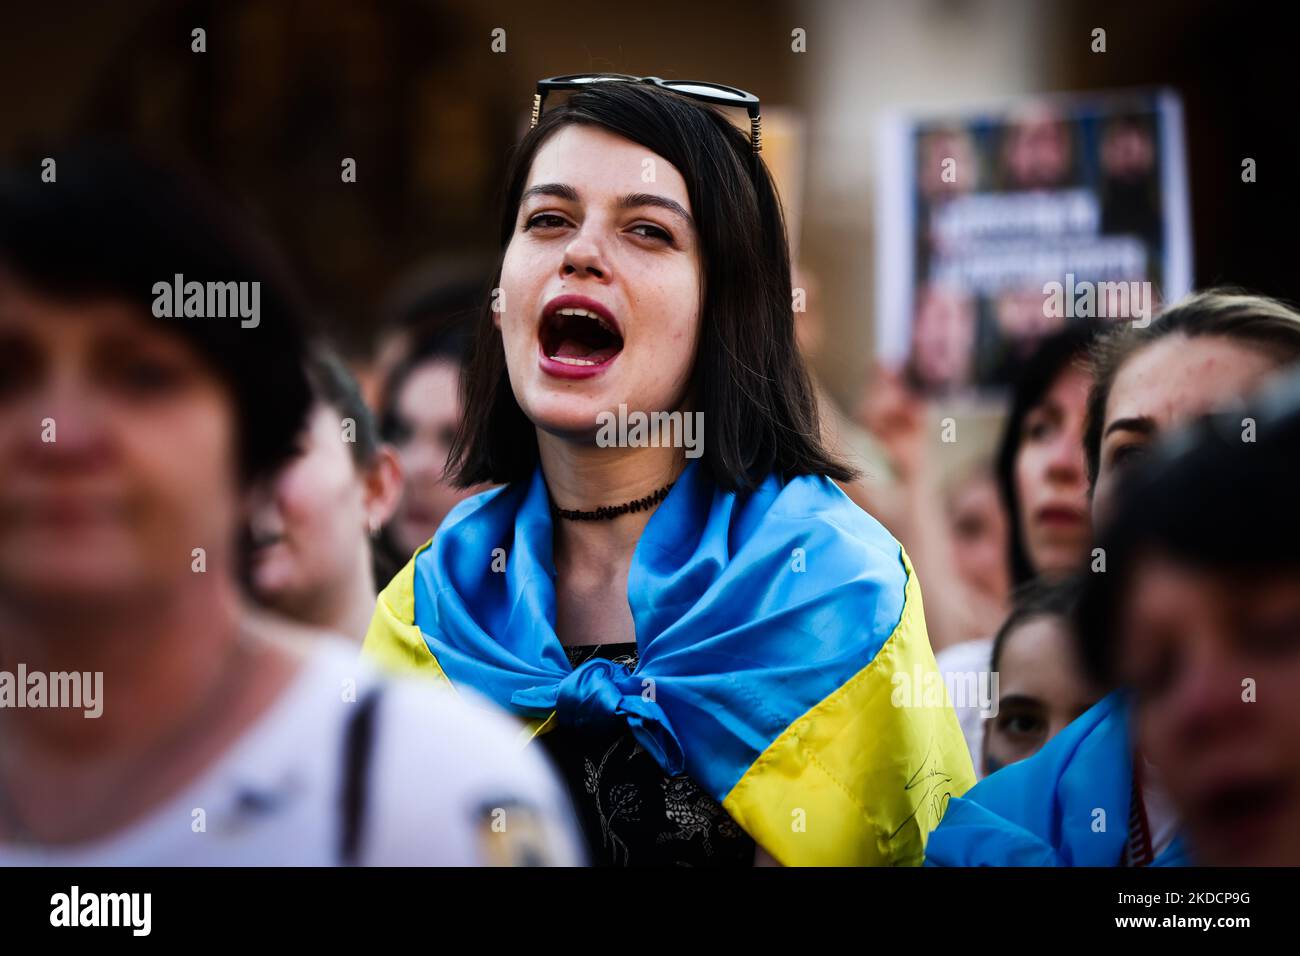 A woman attends a demonstration at the Main Square in support of Azovstal 4308 regiment defenders that are currently in Russian captivity. Krakow, Poland on June 25th, 2022. Peaceful rallies were held around the world in support of more than 2,500 Azovstal prisoners of war. The Azov Regiment was among the Ukrainian units that defended the steelworks in the city of Mariupol for nearly three months before surrendering in May under relentless Russian attacks from the ground, sea and air. (Photo by Beata Zawrzel/NurPhoto) Stock Photo